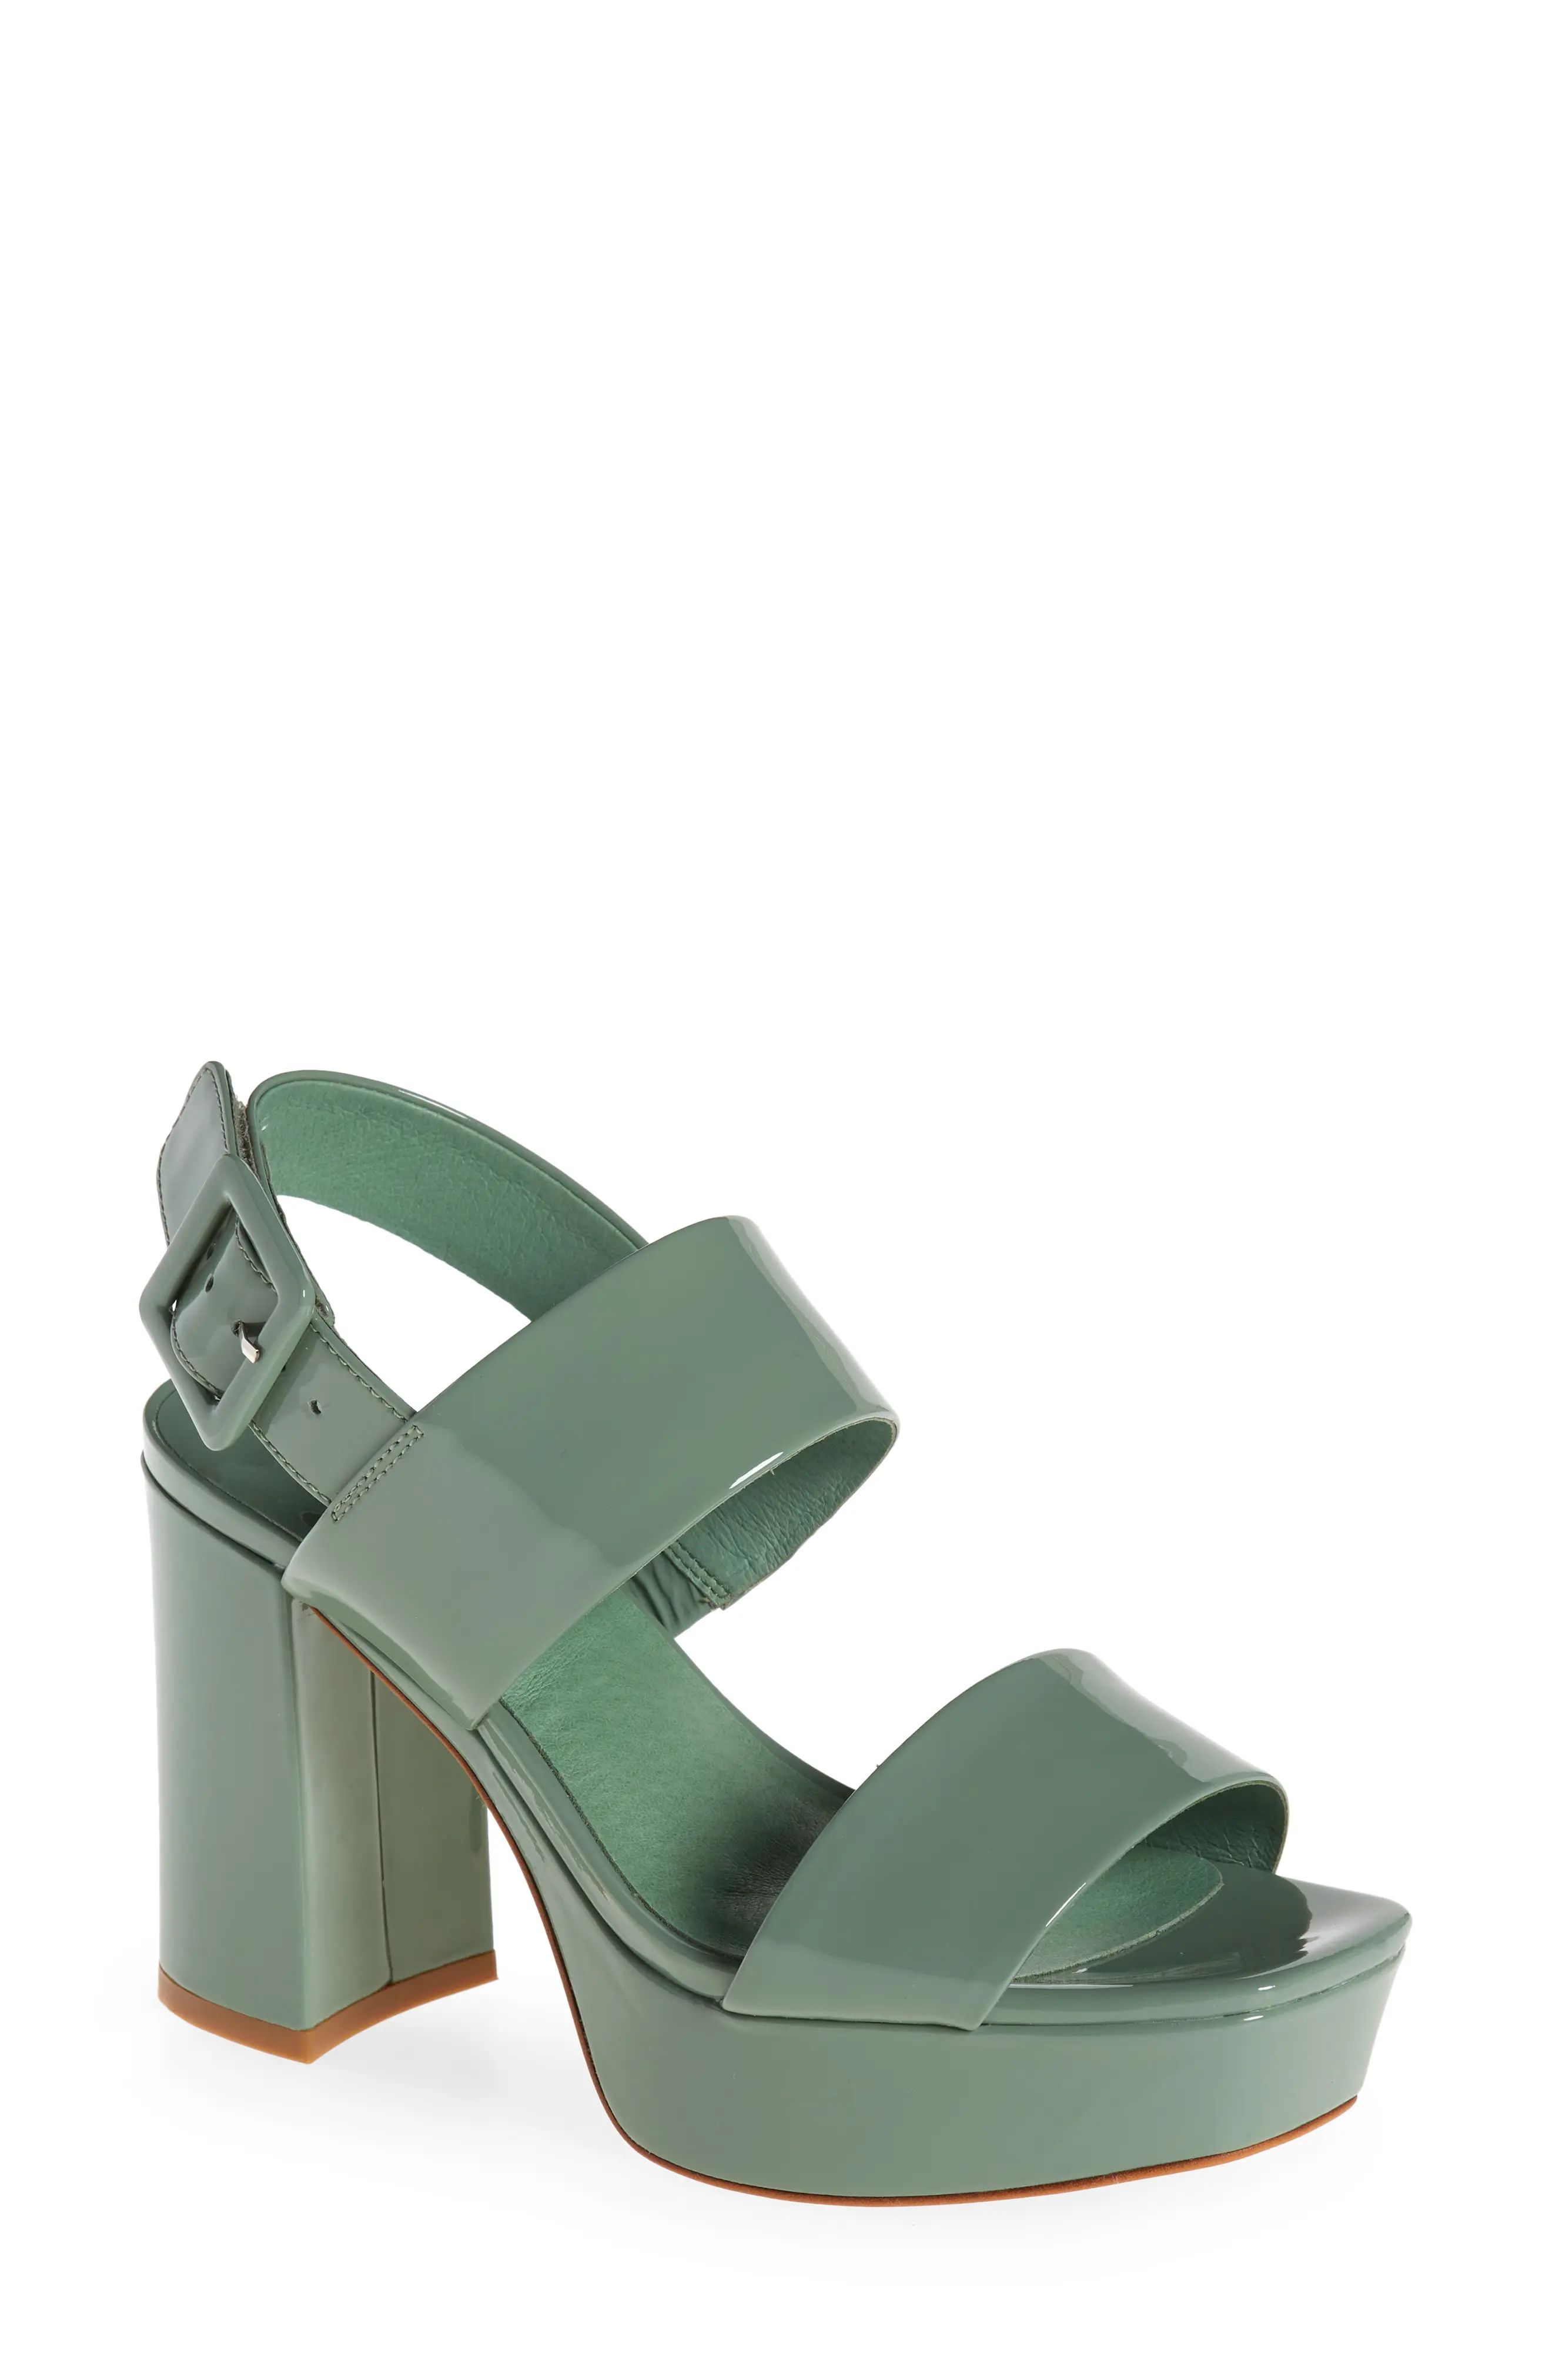 Jeffrey Campbell Ammaly Platform Slingback Sandal, Size 6.5 in Dusty Green Patent at Nordstrom | Nordstrom